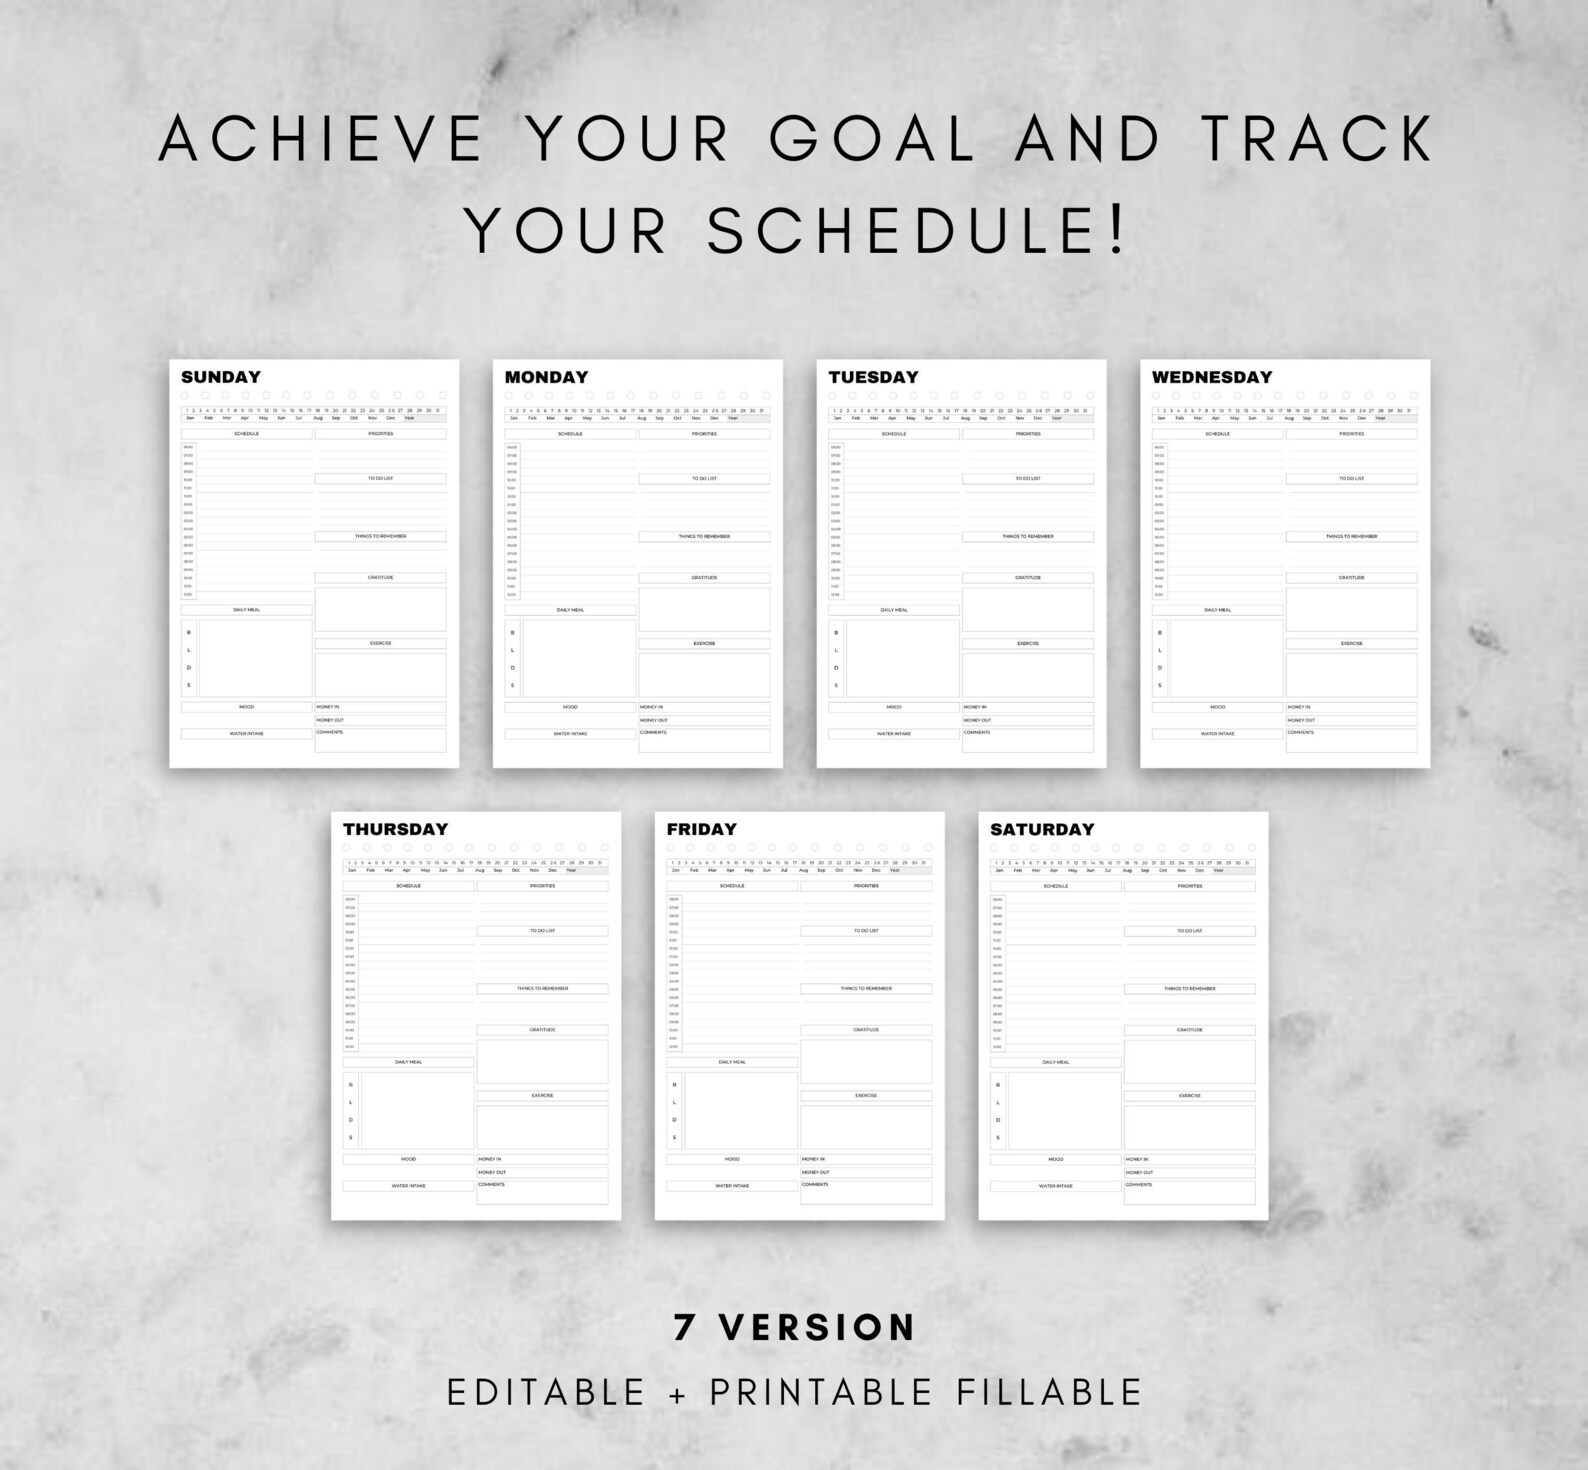 7-day-planner-editable-daily-planner-weekly-planner-daily-etsy